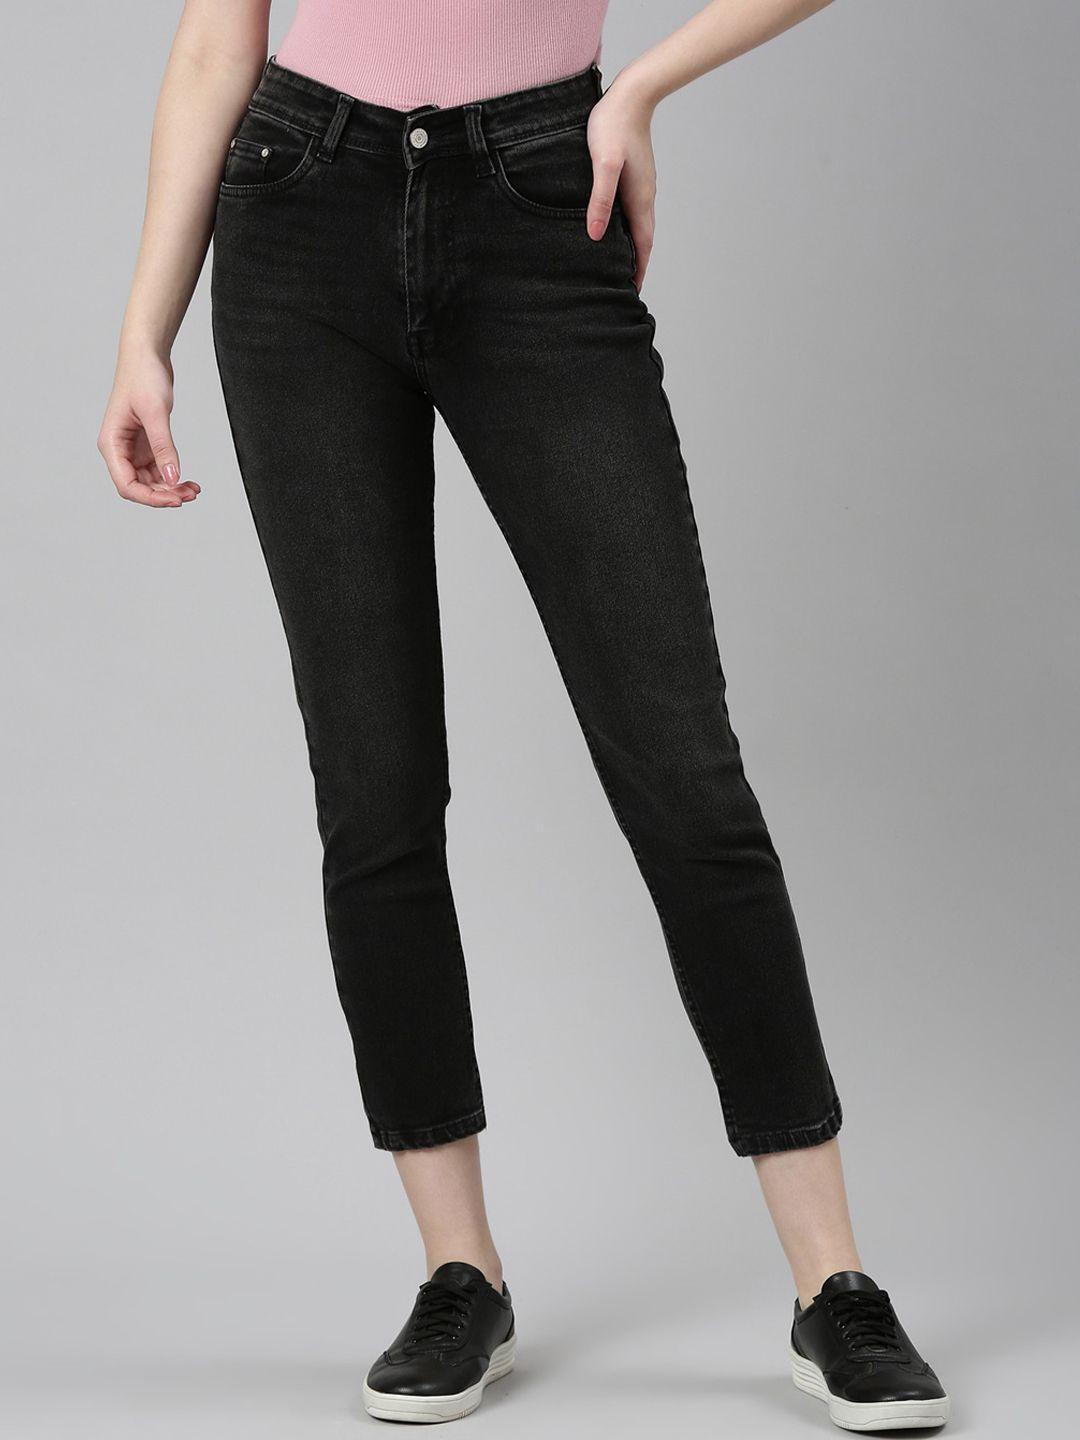 showoff women jean light fade stretchable cotton jeans